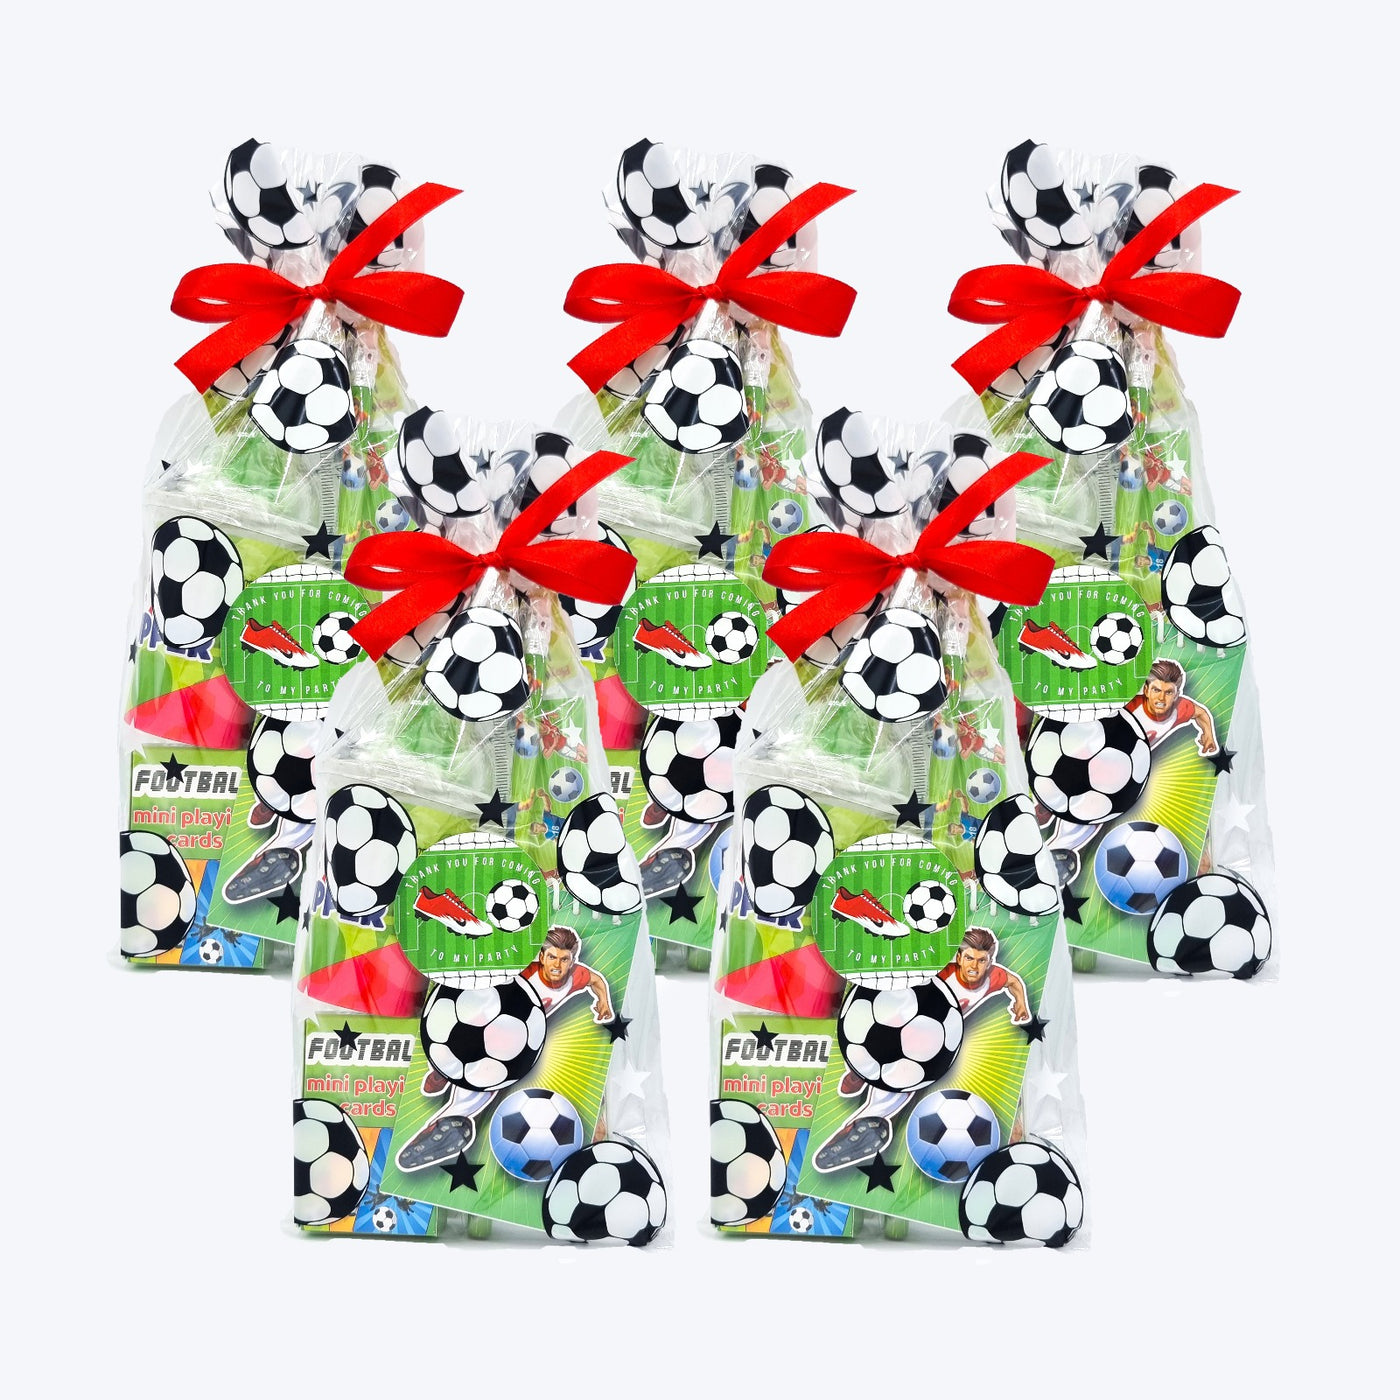 Children Pre Filled Birthday Football Party Favours With Toys And Sweets,  For Boys And Girls.